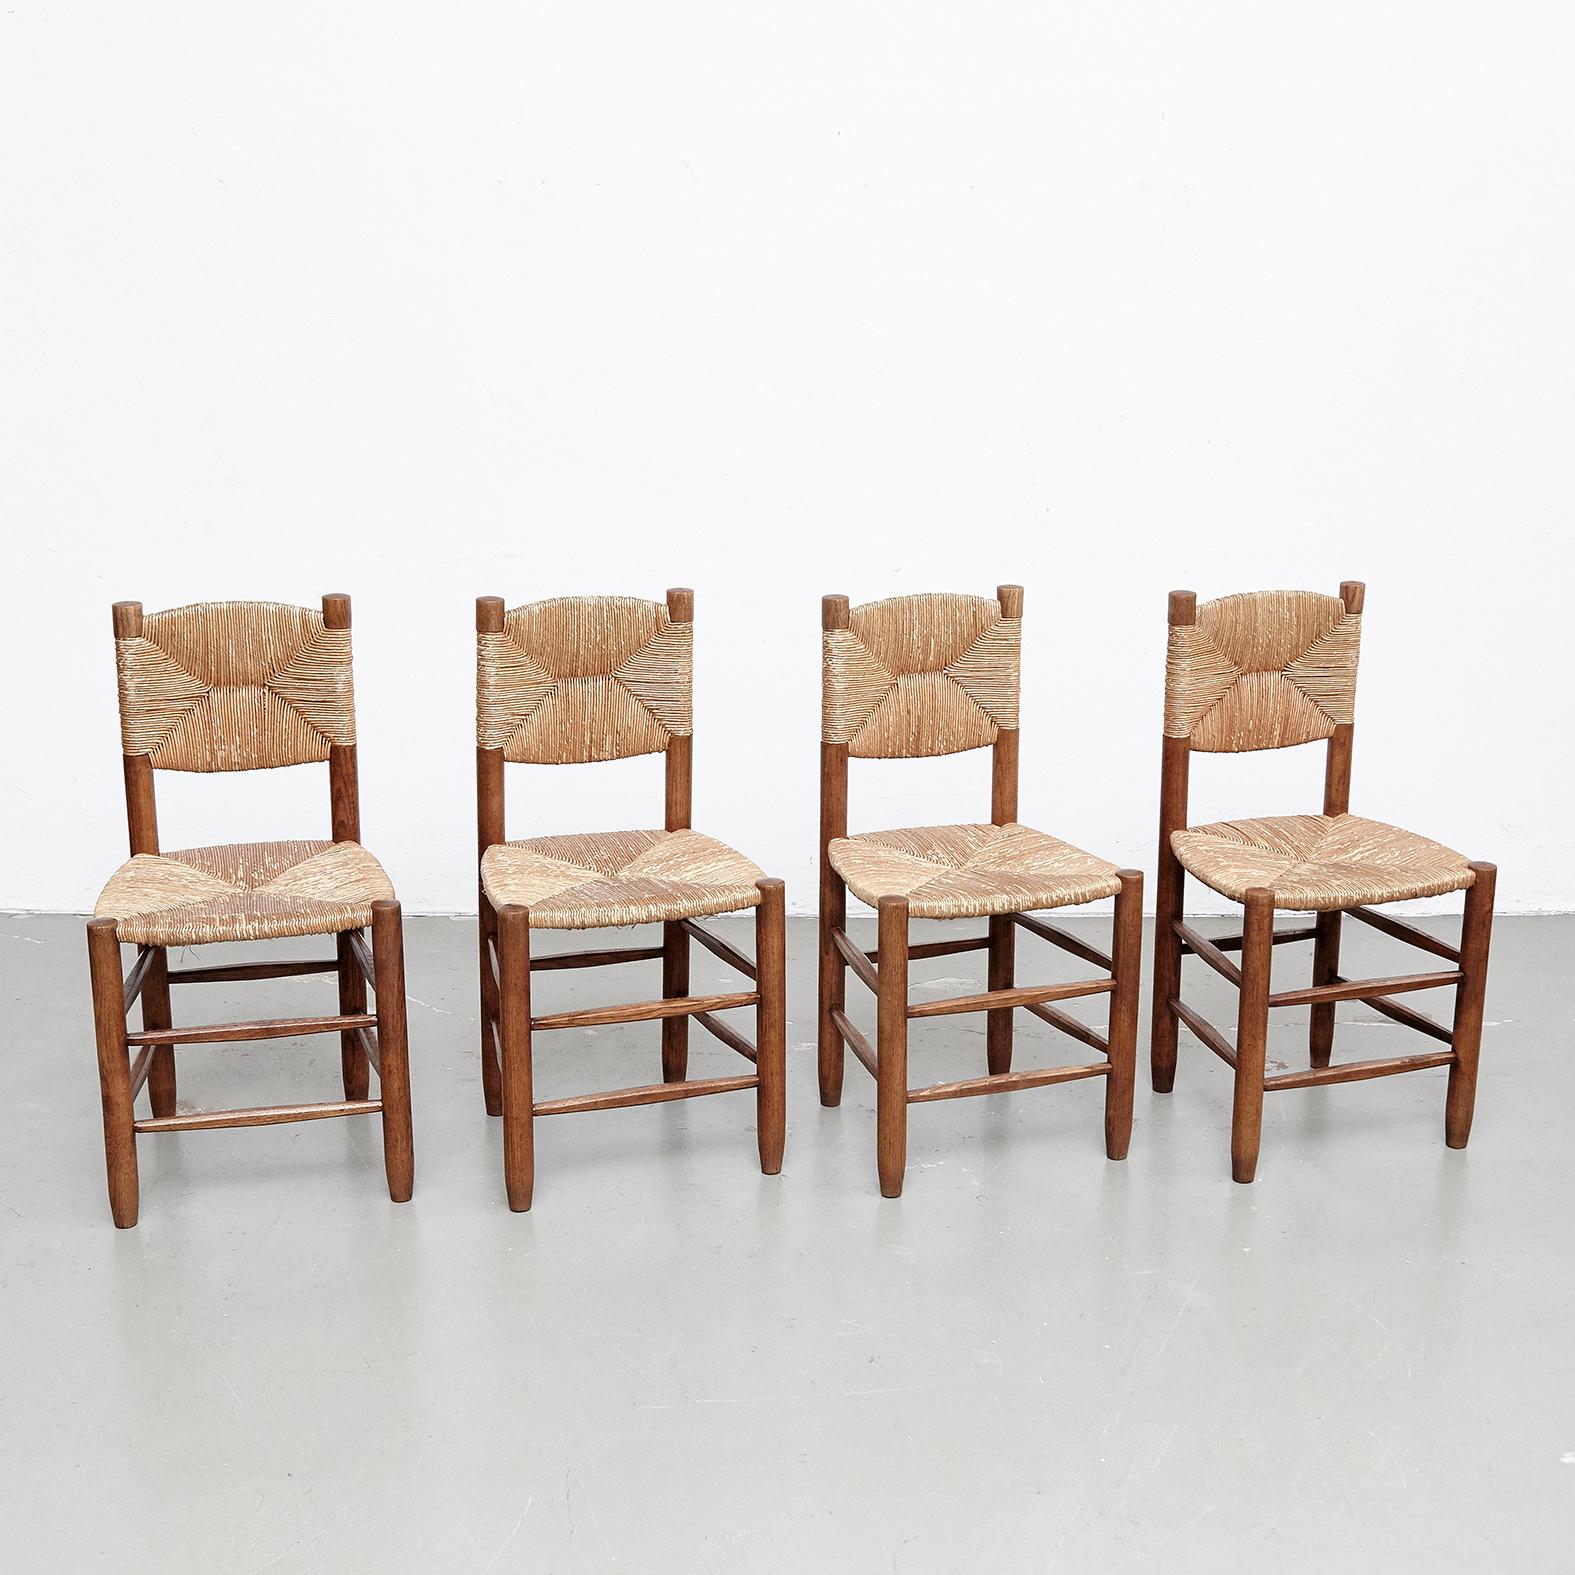 Set of four chairs designed by Charlotte Perriand, circa 1950.
Manufactured in France.

 Made in wood base and legs with rush seat.

In original condition, with minor wear consistent with age and use, preserving a beautiful patina.